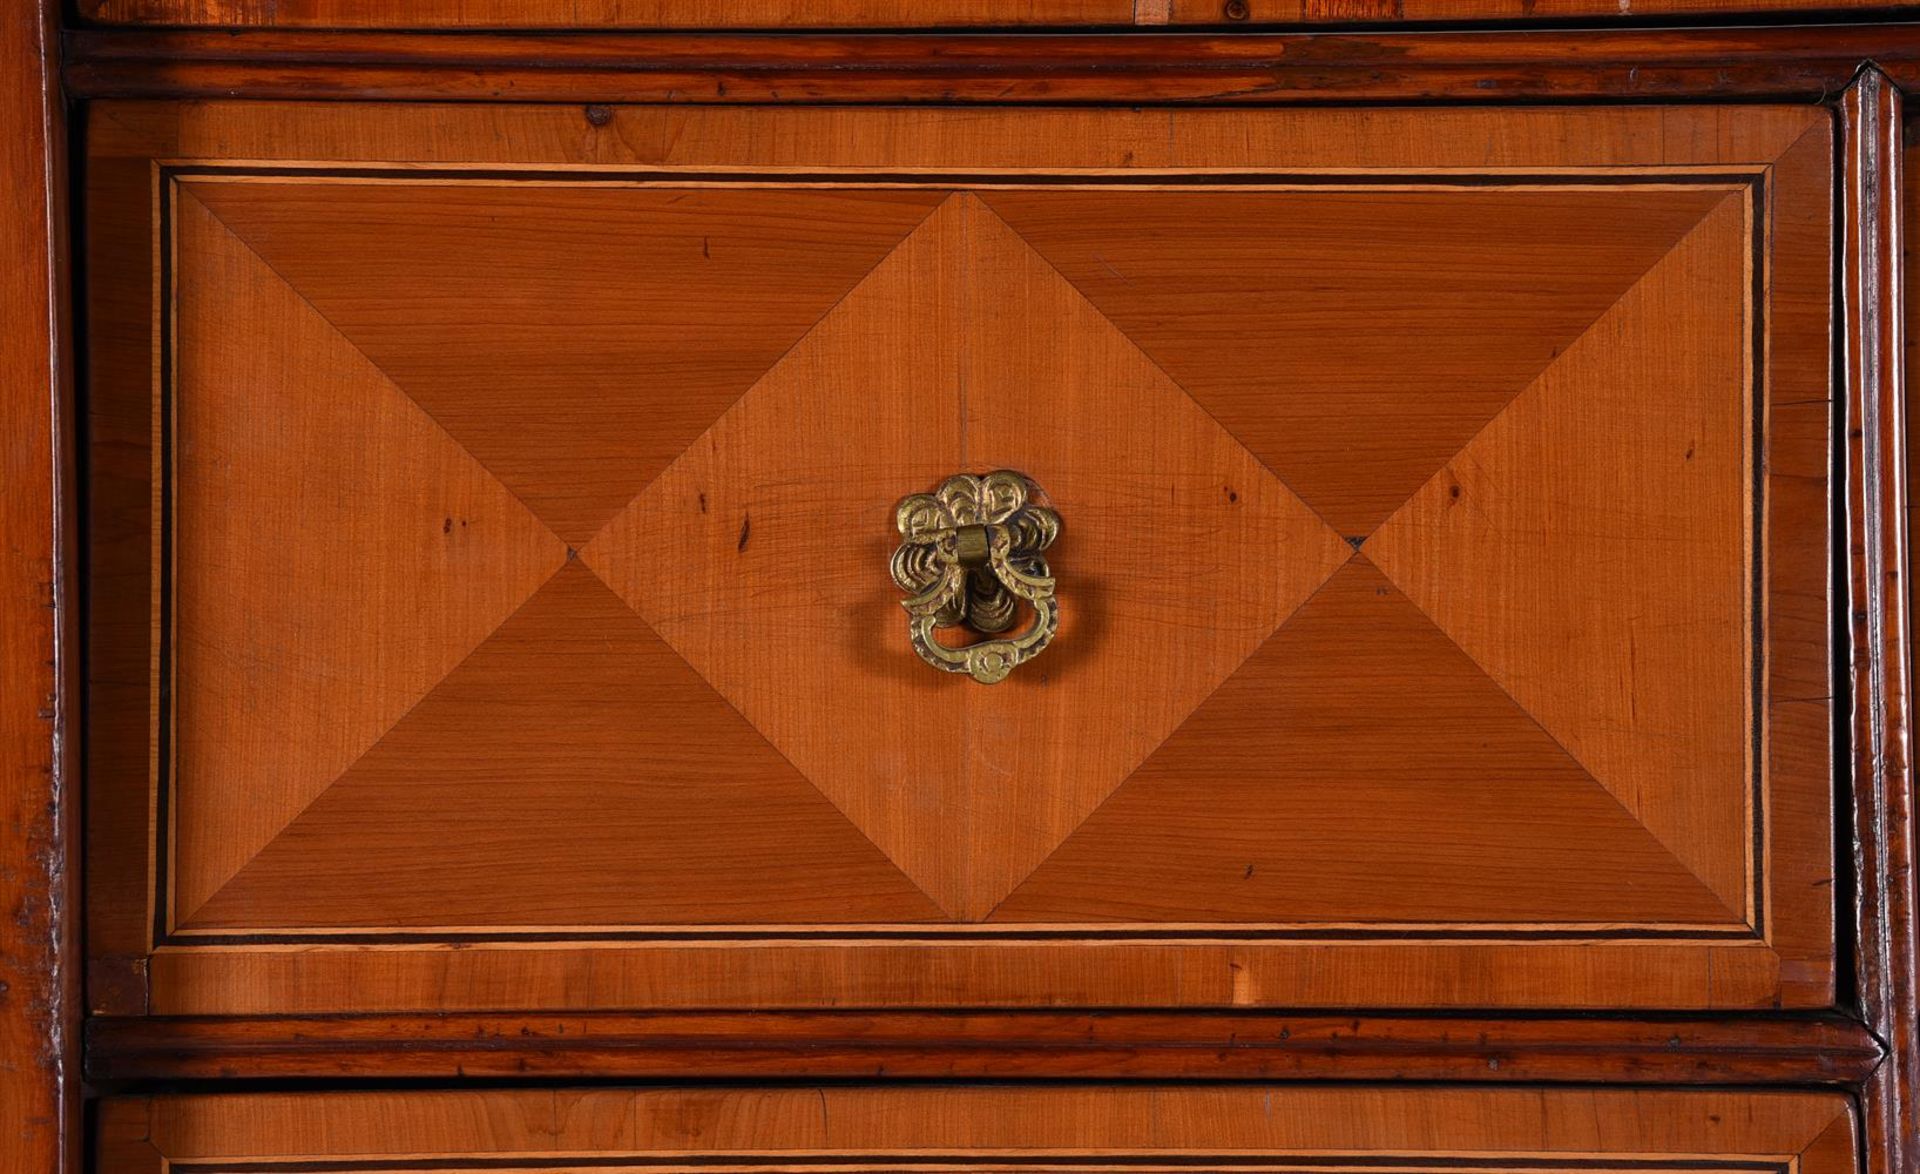 AN UNUSUAL YEW WOOD CABINET ON CHEST, 18TH CENTURY - Image 7 of 7